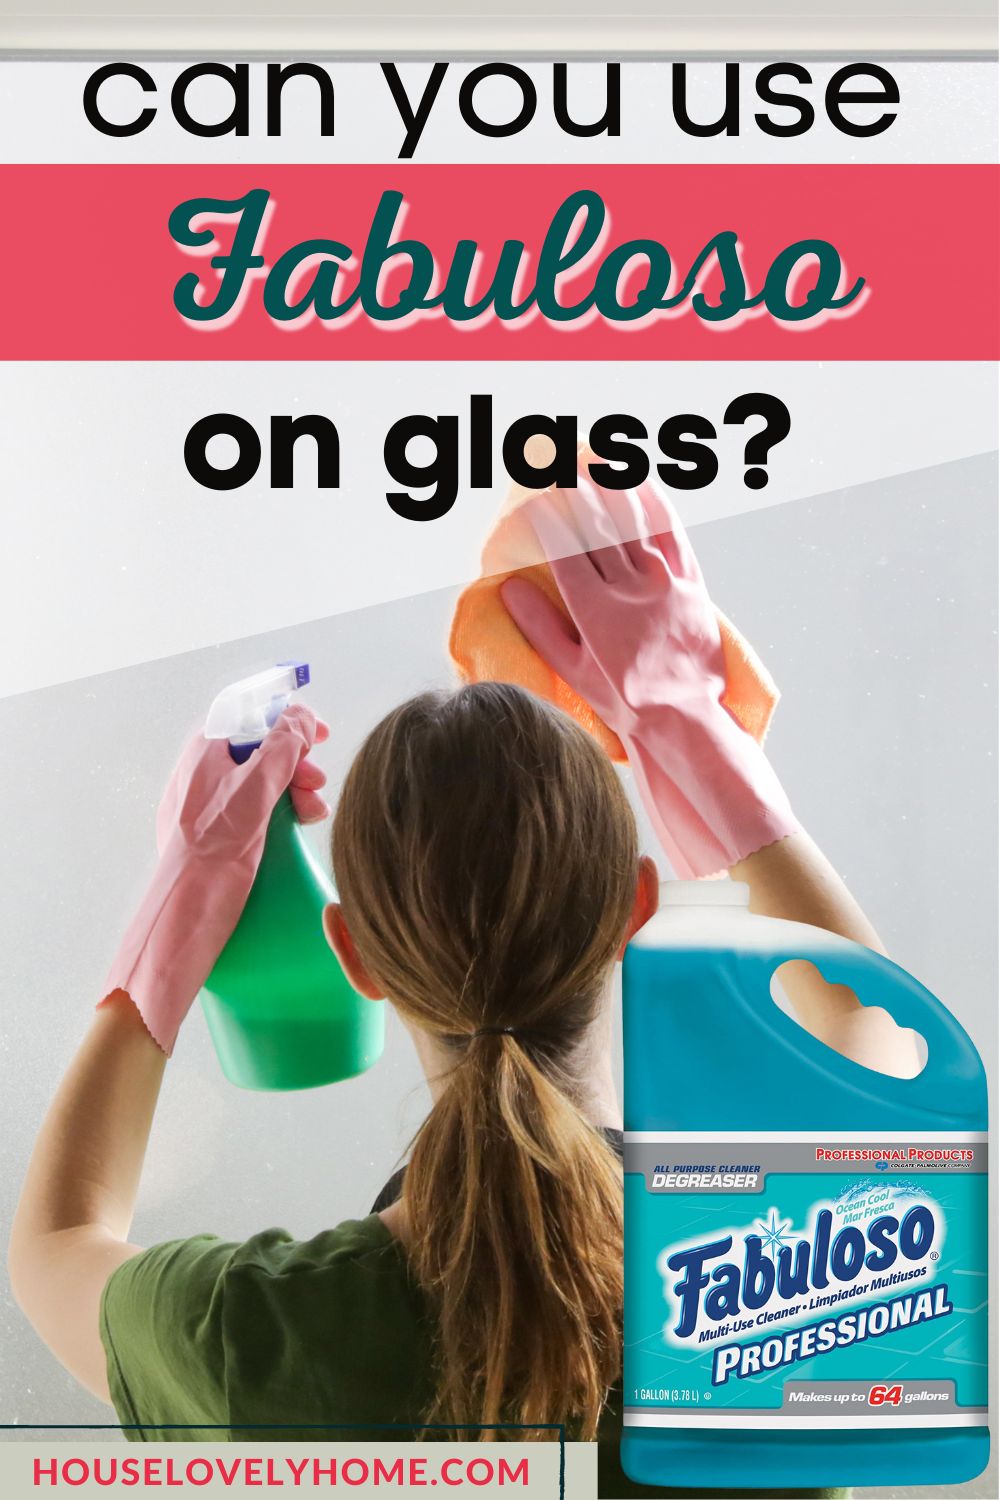 Image showing a woman cleaning a glass window with a gallon of fabuloso and a text overlay that reads Can you use Fabuloso on glass